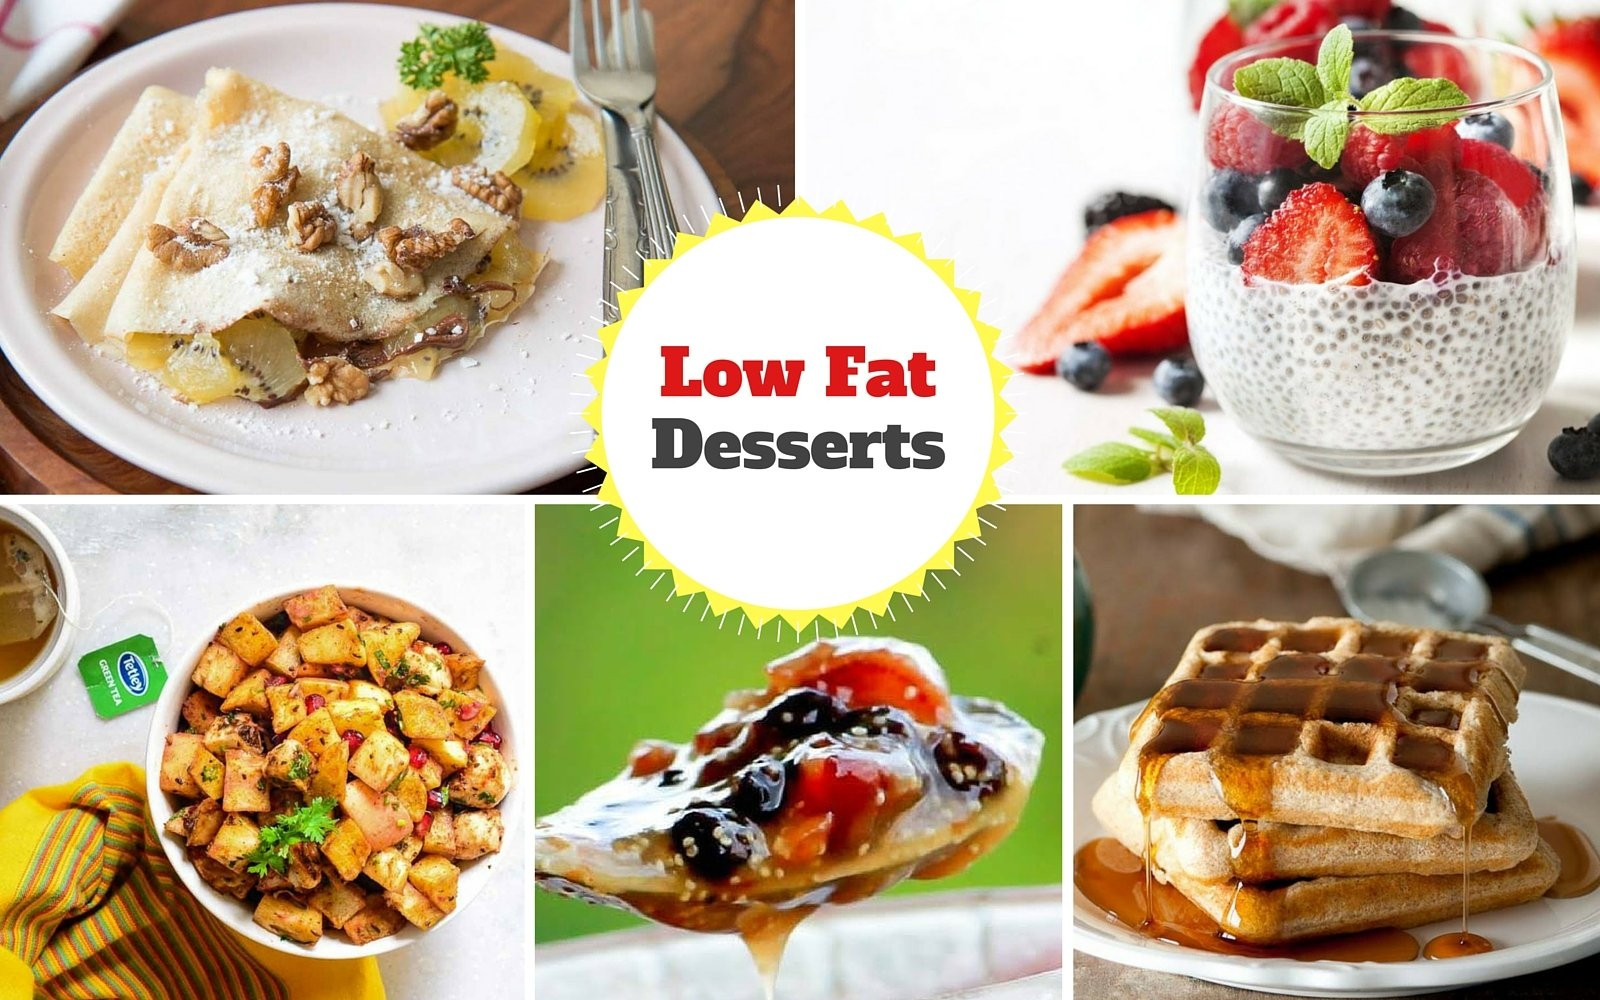 Low Fat Desserts To Buy
 10 Easy Low Fat Dessert Recipes To Satiate Your Sweet